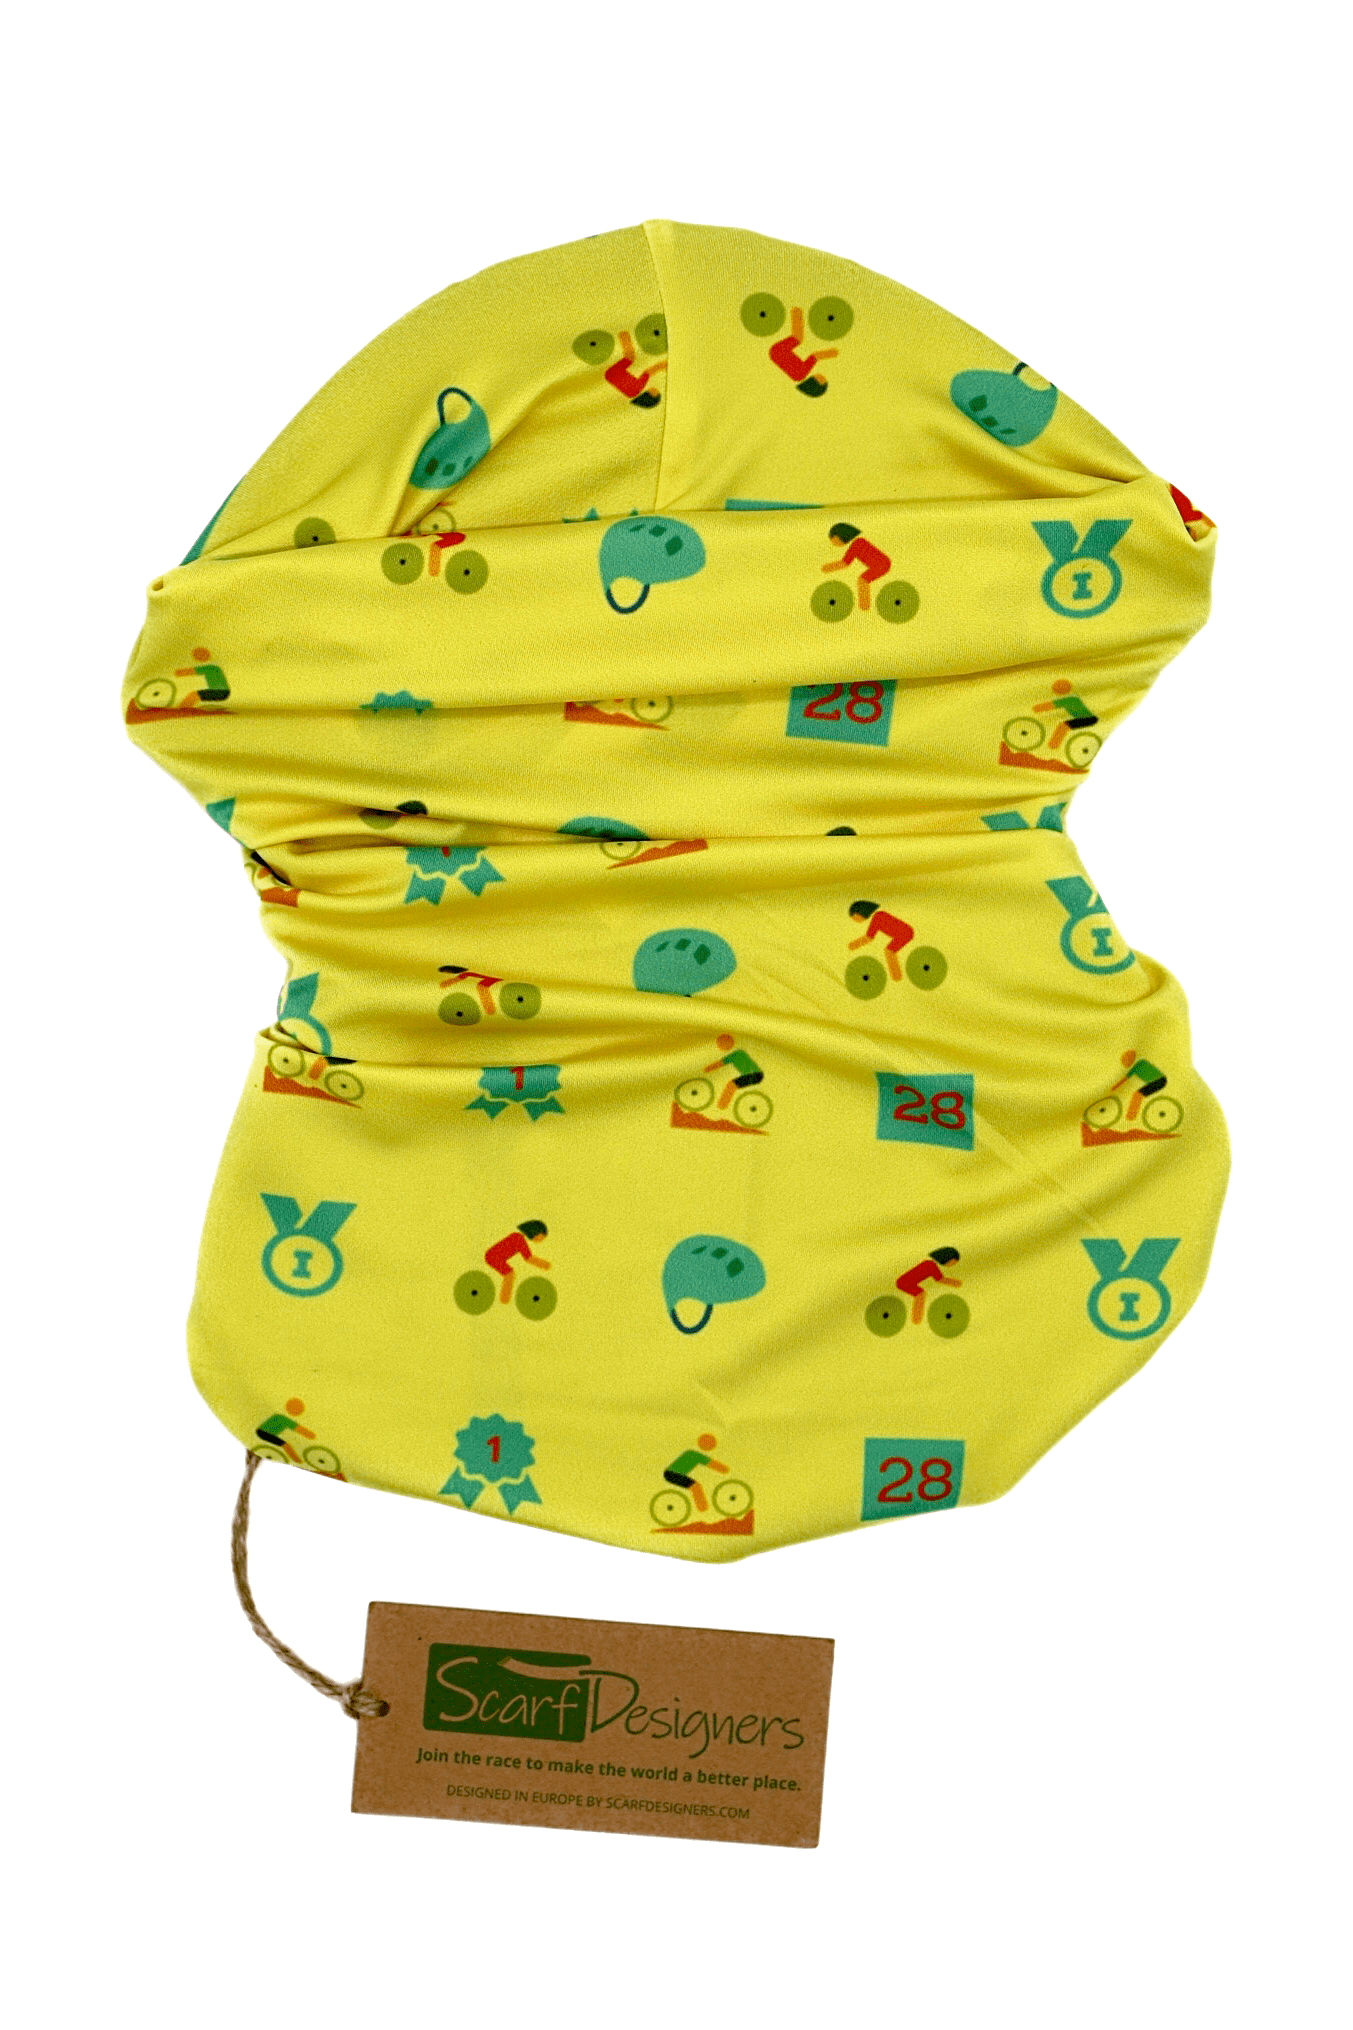 This is a unisex, multifunctional and sustainable bandana with bike and cycling print in yellow. It is made from recycled polyester which is breathable, durable, soft to touch, easy to care and fast drying material. It makes it perfectly suitable for all kinds of sports like biking, hiking, jogging or skiing. This is a versatile bandana that can be used as a scarf, face mask, bandana or headband and it is also known as tube scarf, neck gaiter or face mask. It is a vegan product certified by PETA.